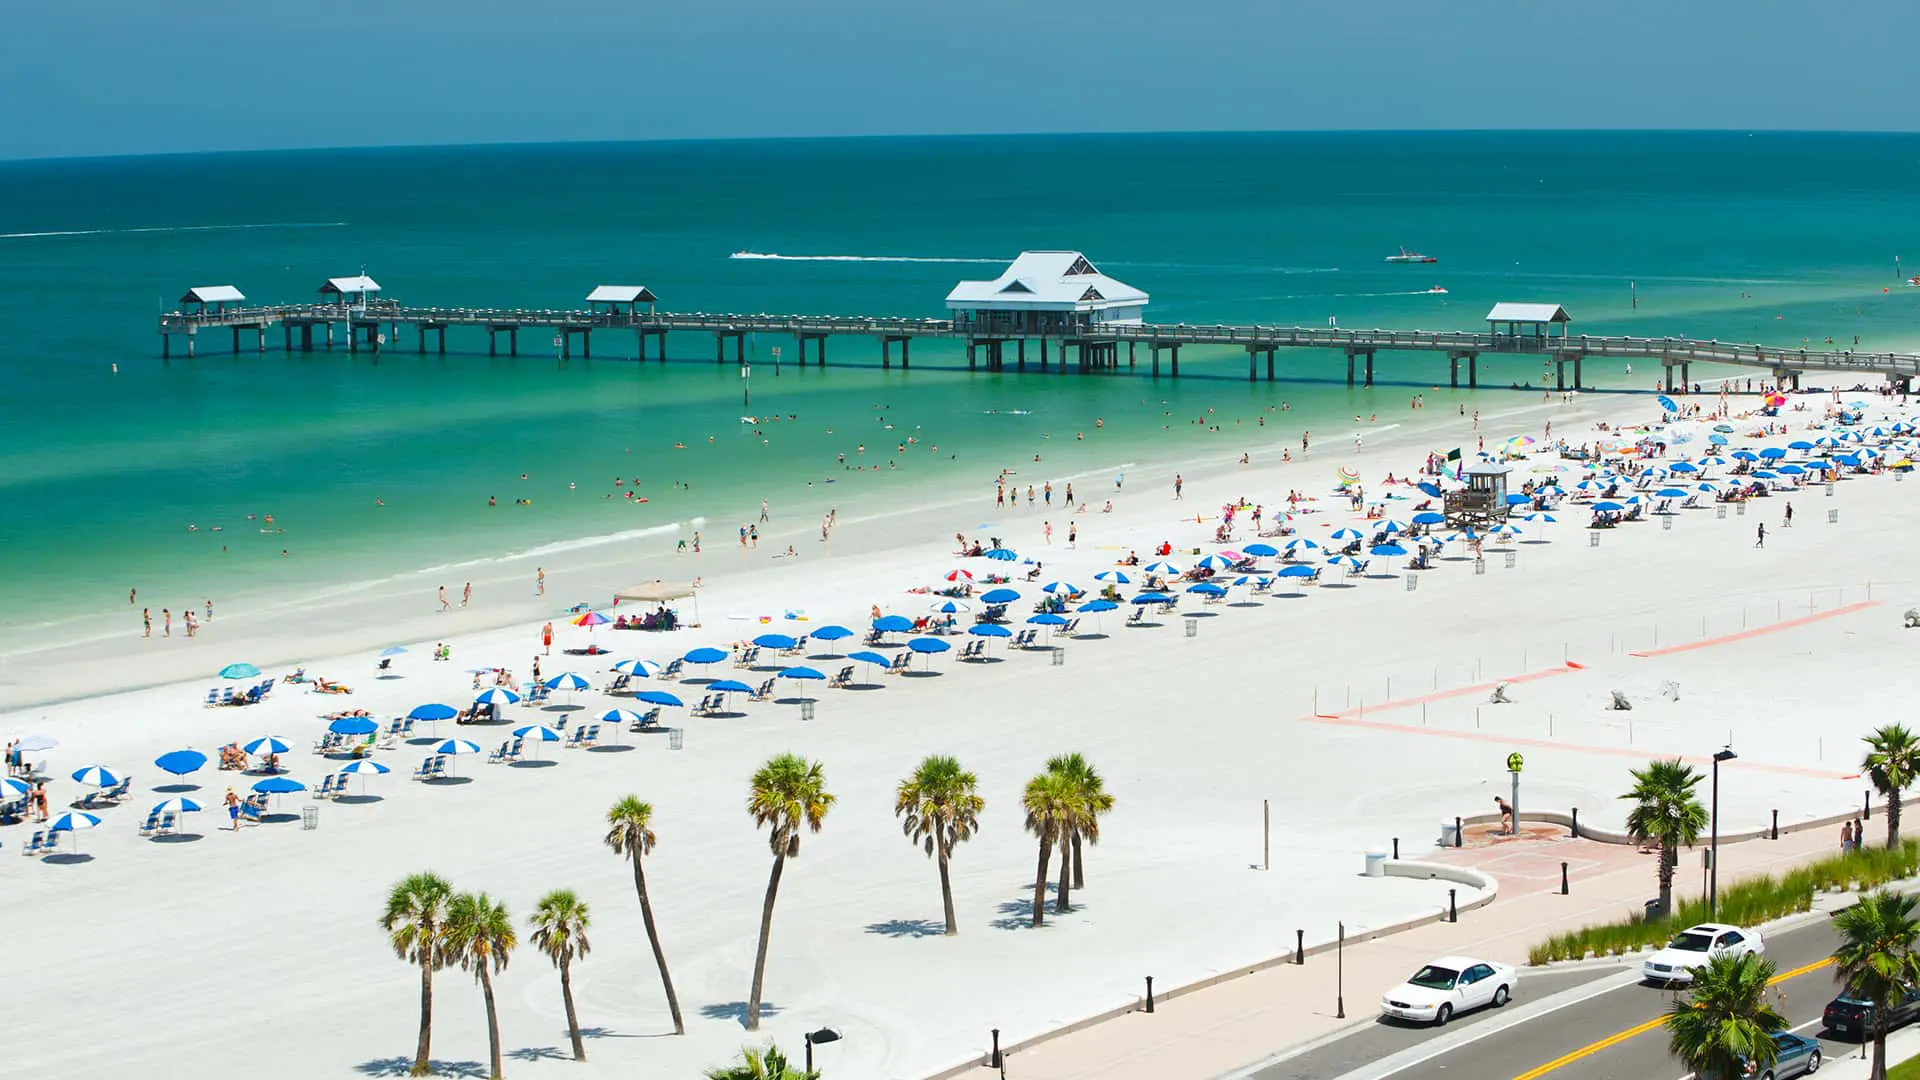 11Day Trip to Clearwater Beach with Seaside Lunch